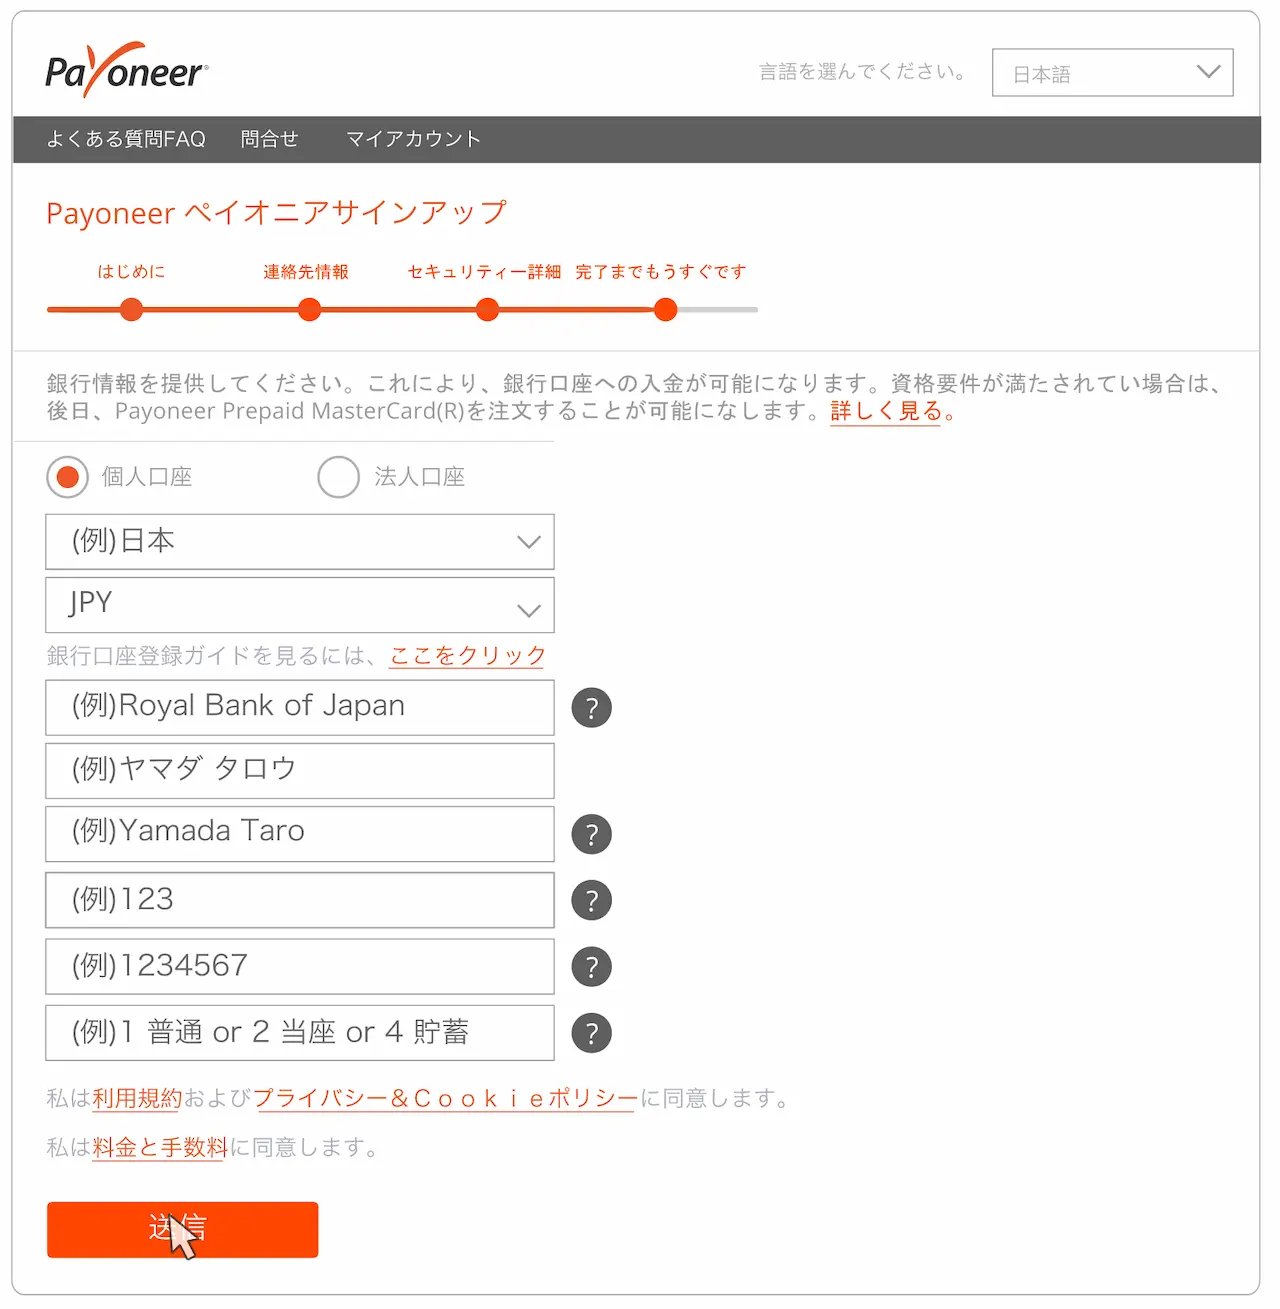 HowTo-Register-Payoneer-Account_04